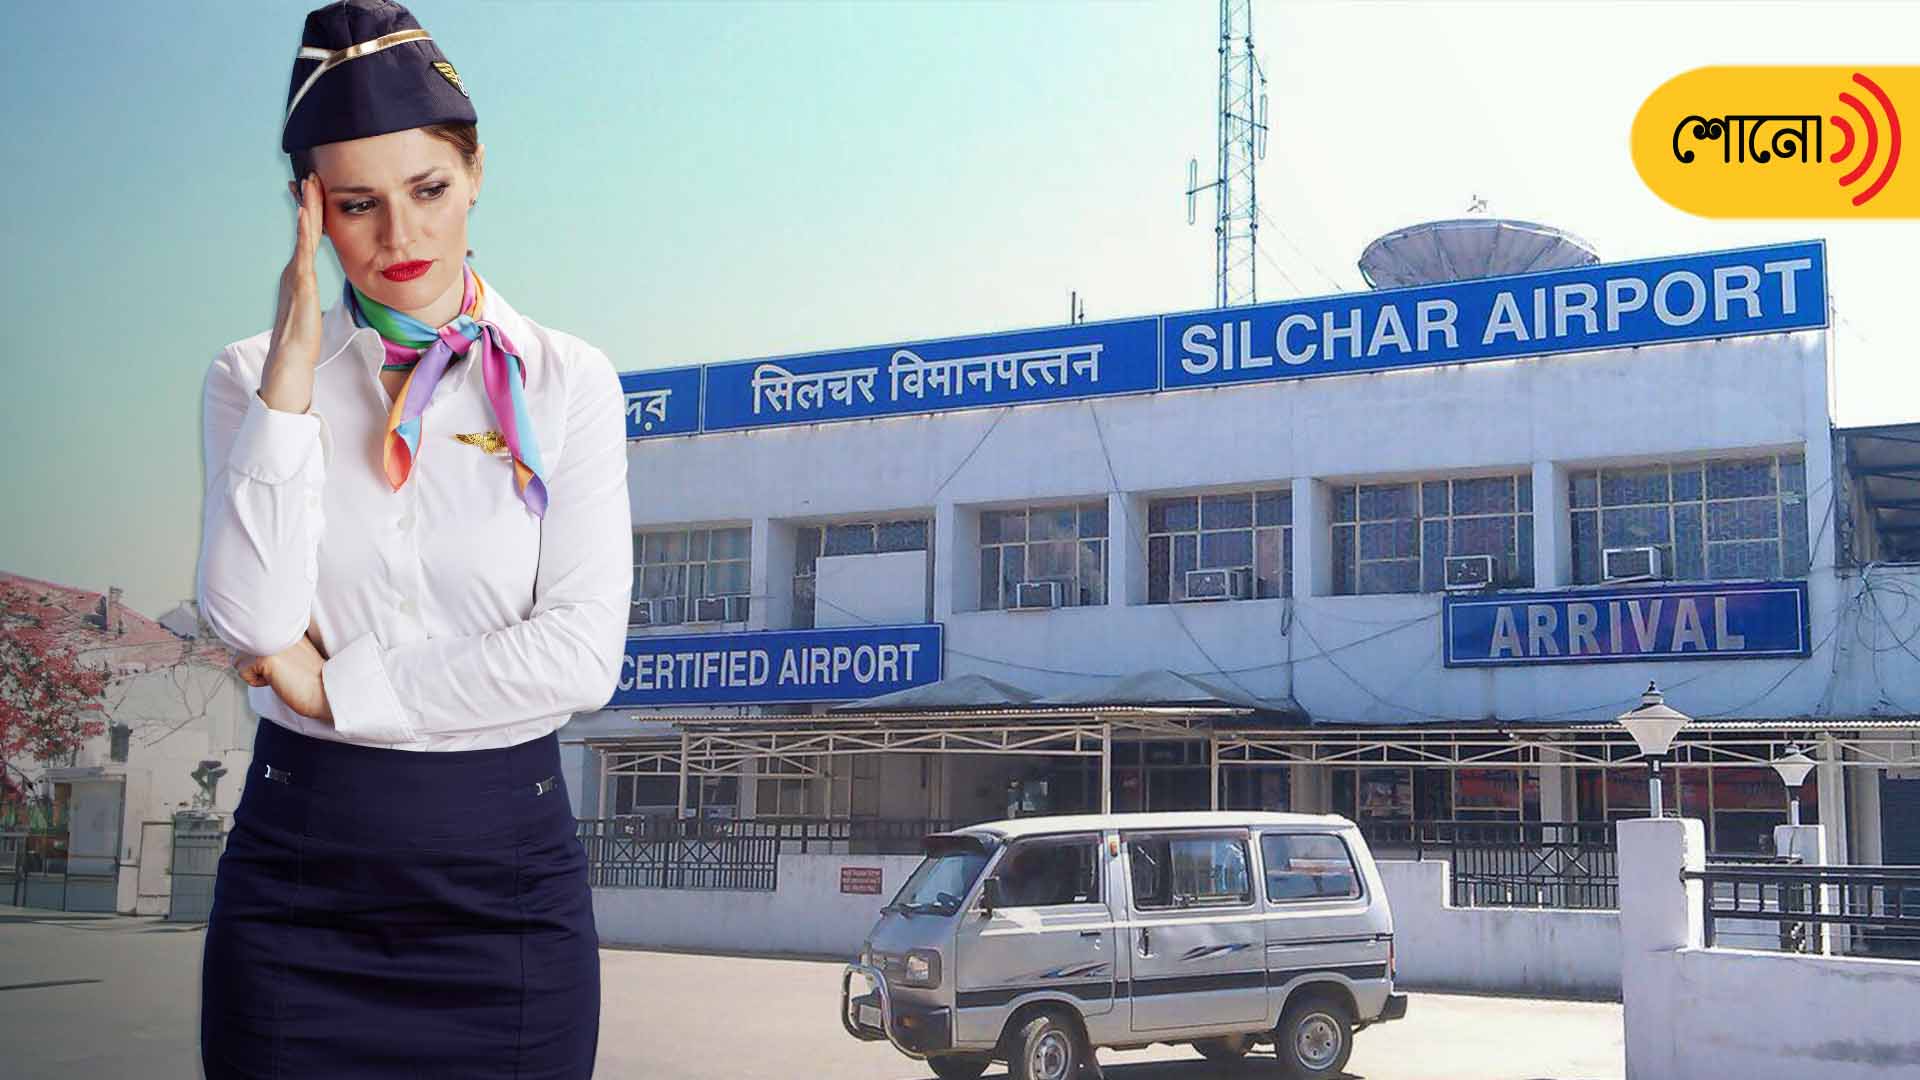 BJP Leader Offloaded For Unruly Behaviour During Take-Off At Silchar Airport